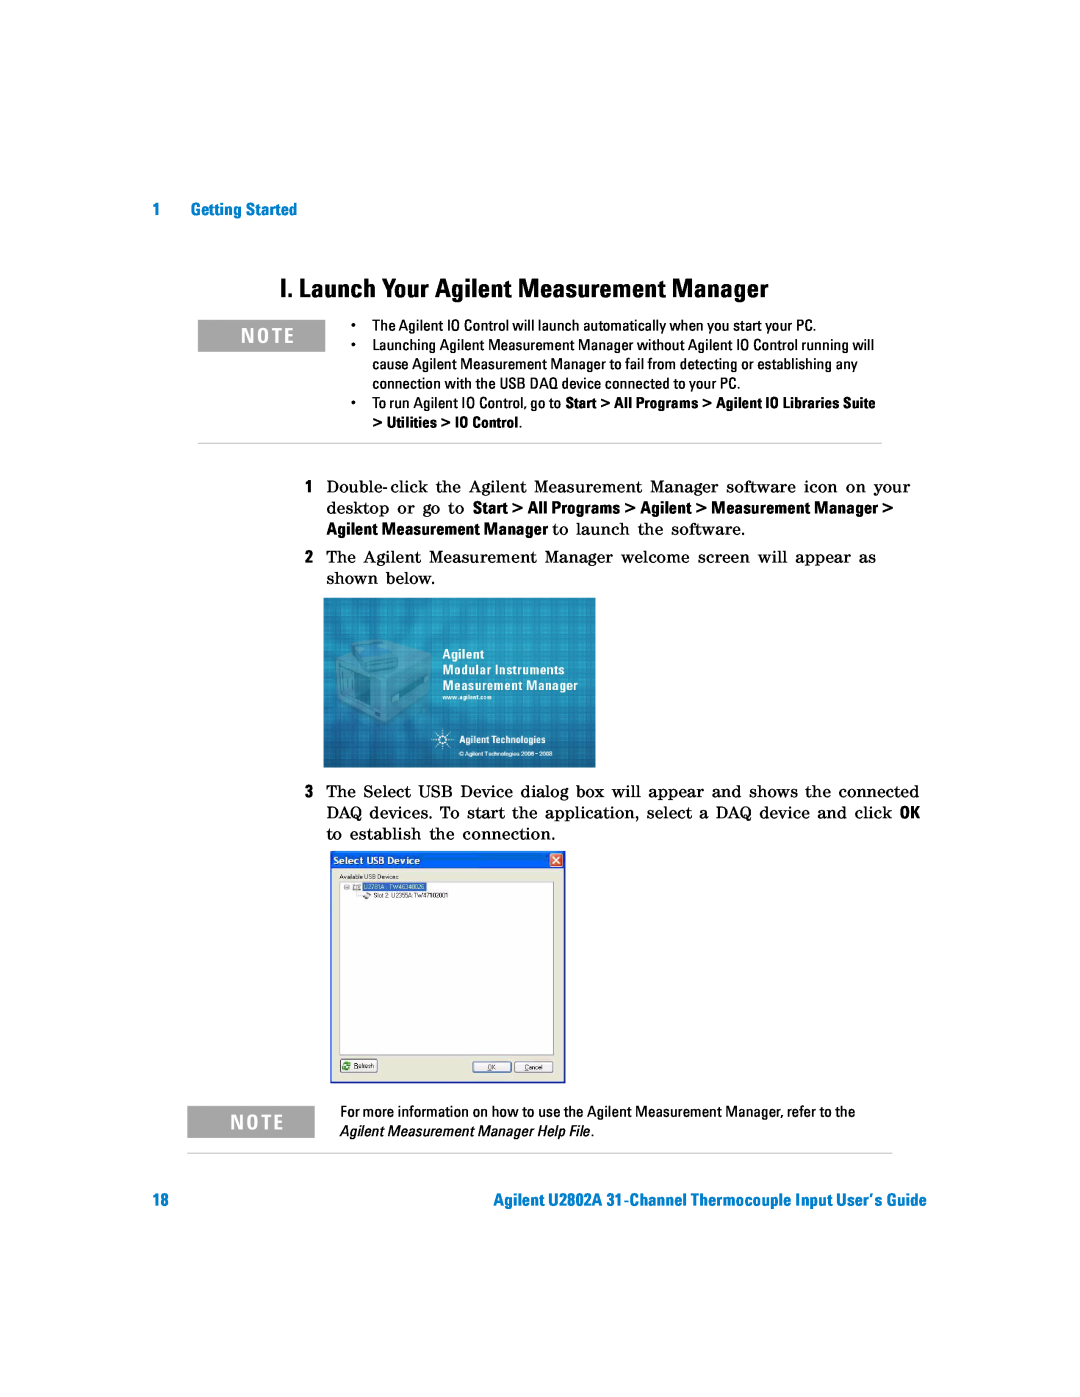 Agilent Technologies U2802A manual I.Launch Your Agilent Measurement Manager, N O Te, 1Getting Started 